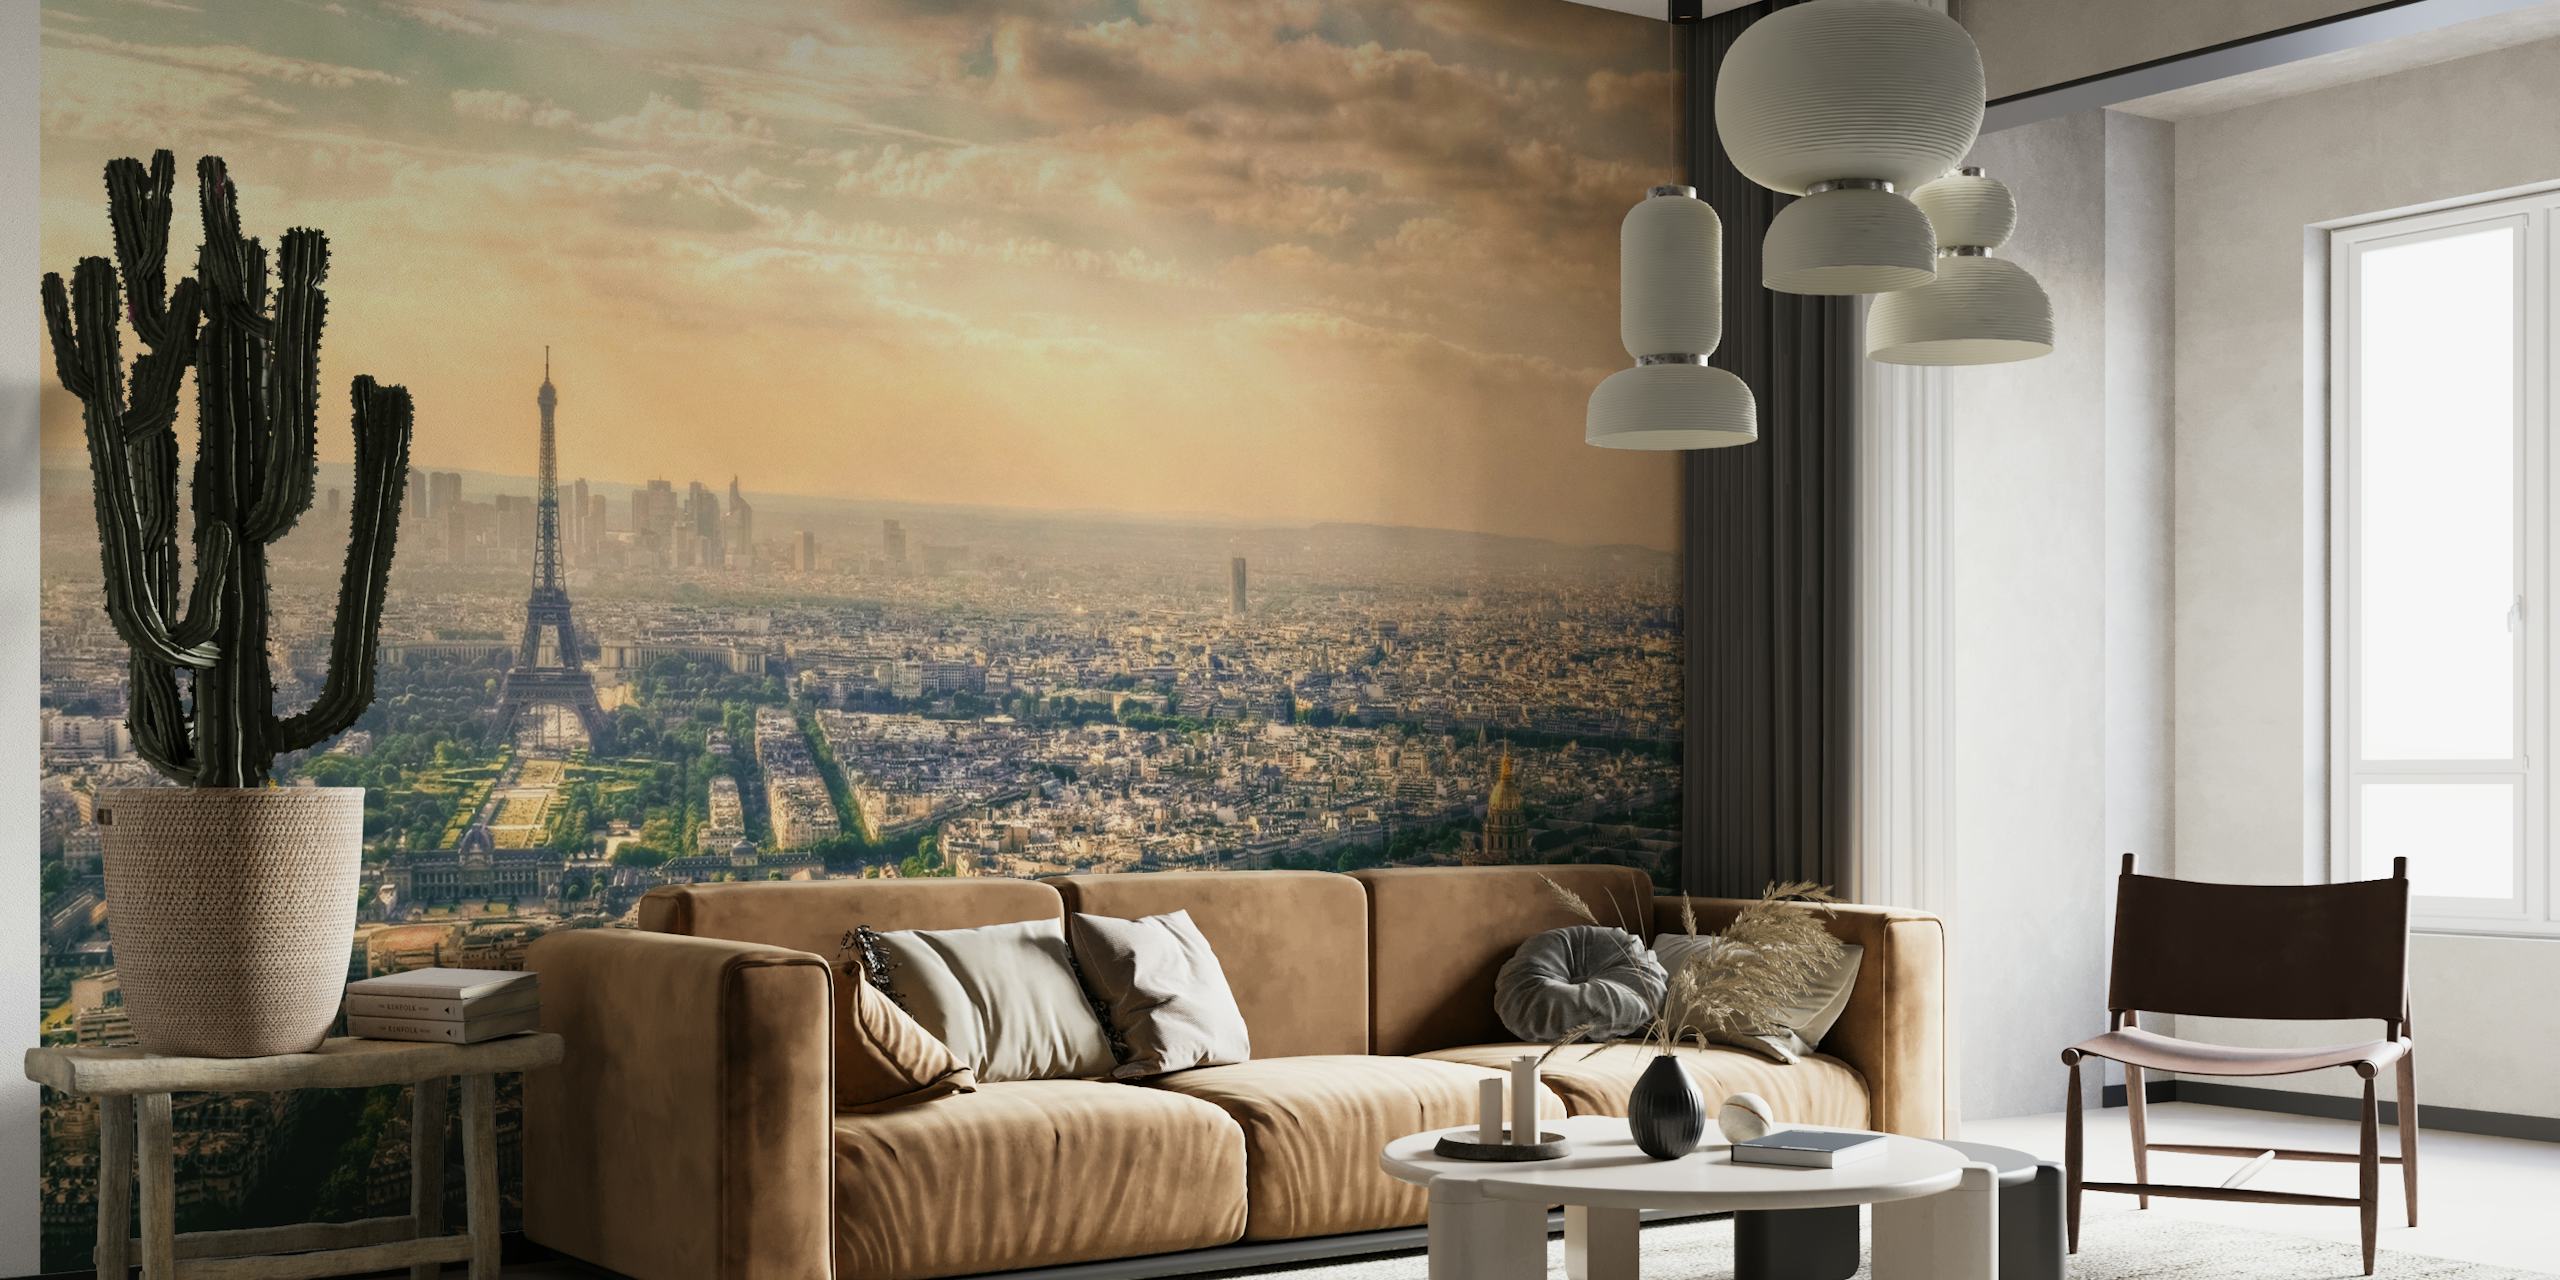 Paris, France wall mural with Eiffel Tower and cityscape